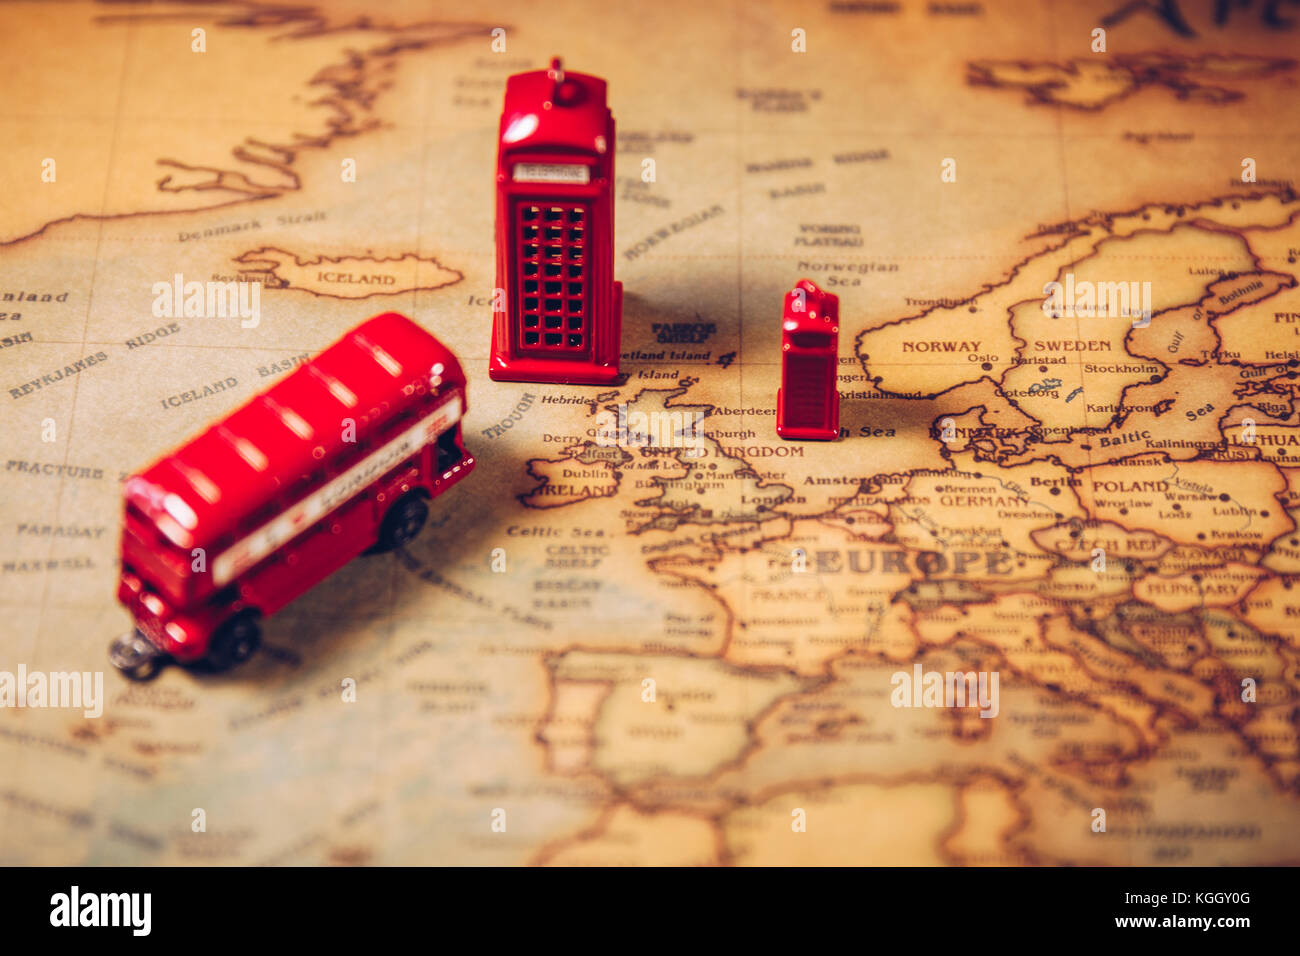 The iconic red bus and Big Ben miniature with compass on the map of London, UK. Concept of travel. Stock Photo